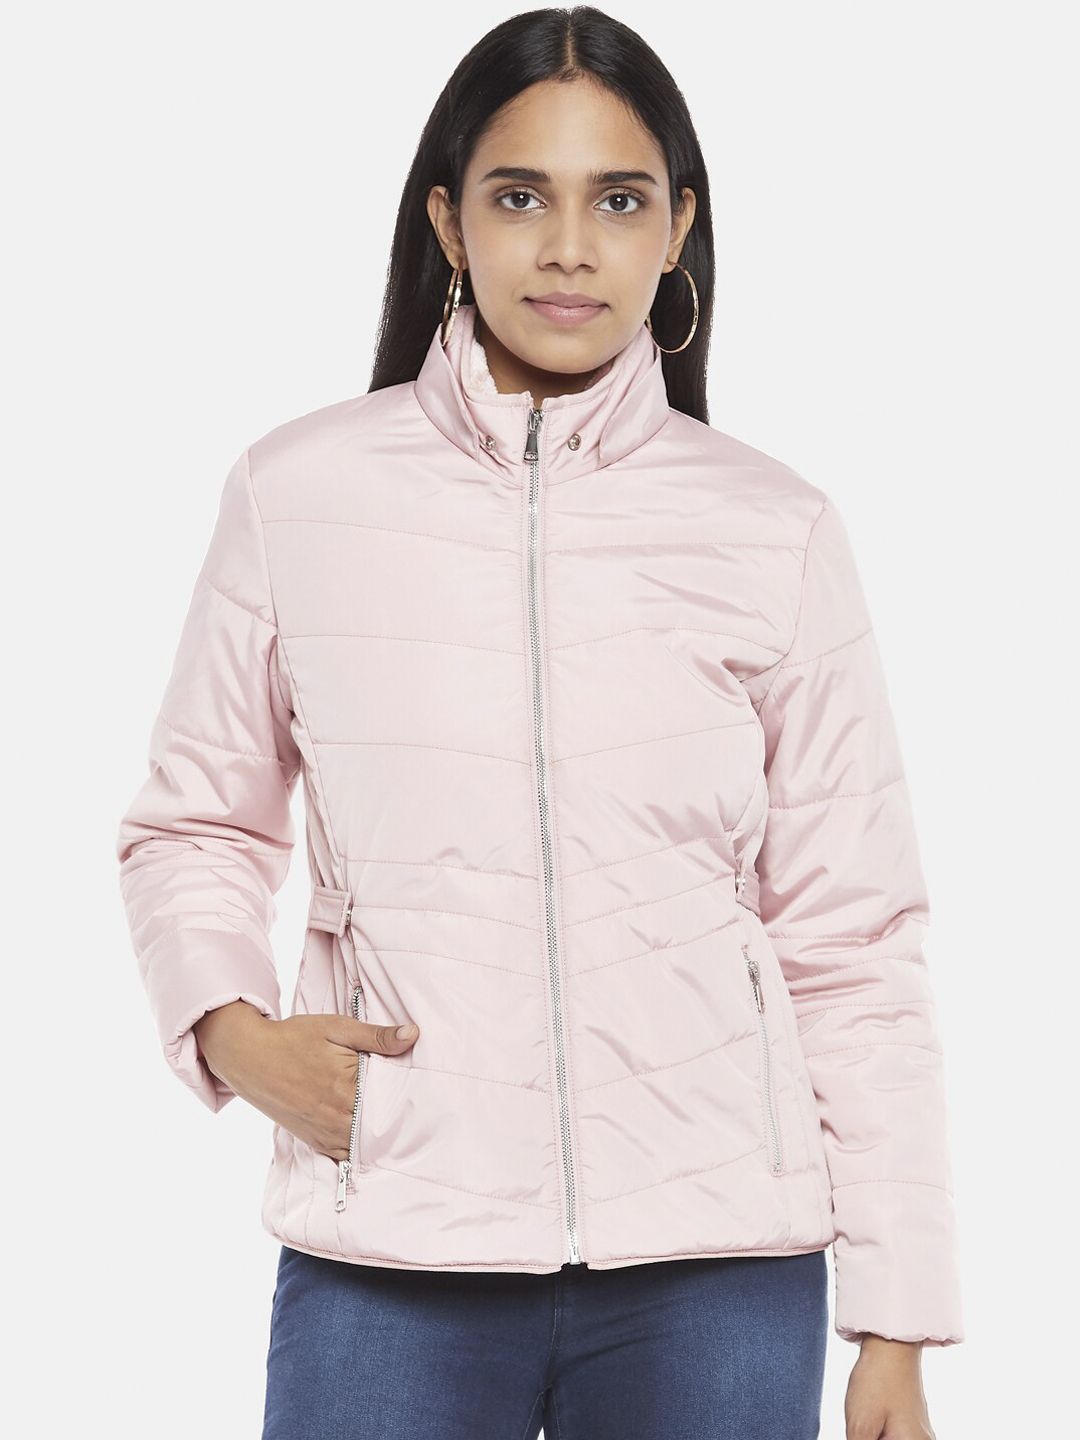 Honey by Pantaloons Women Pink Solid Puffer Jacket Price in India